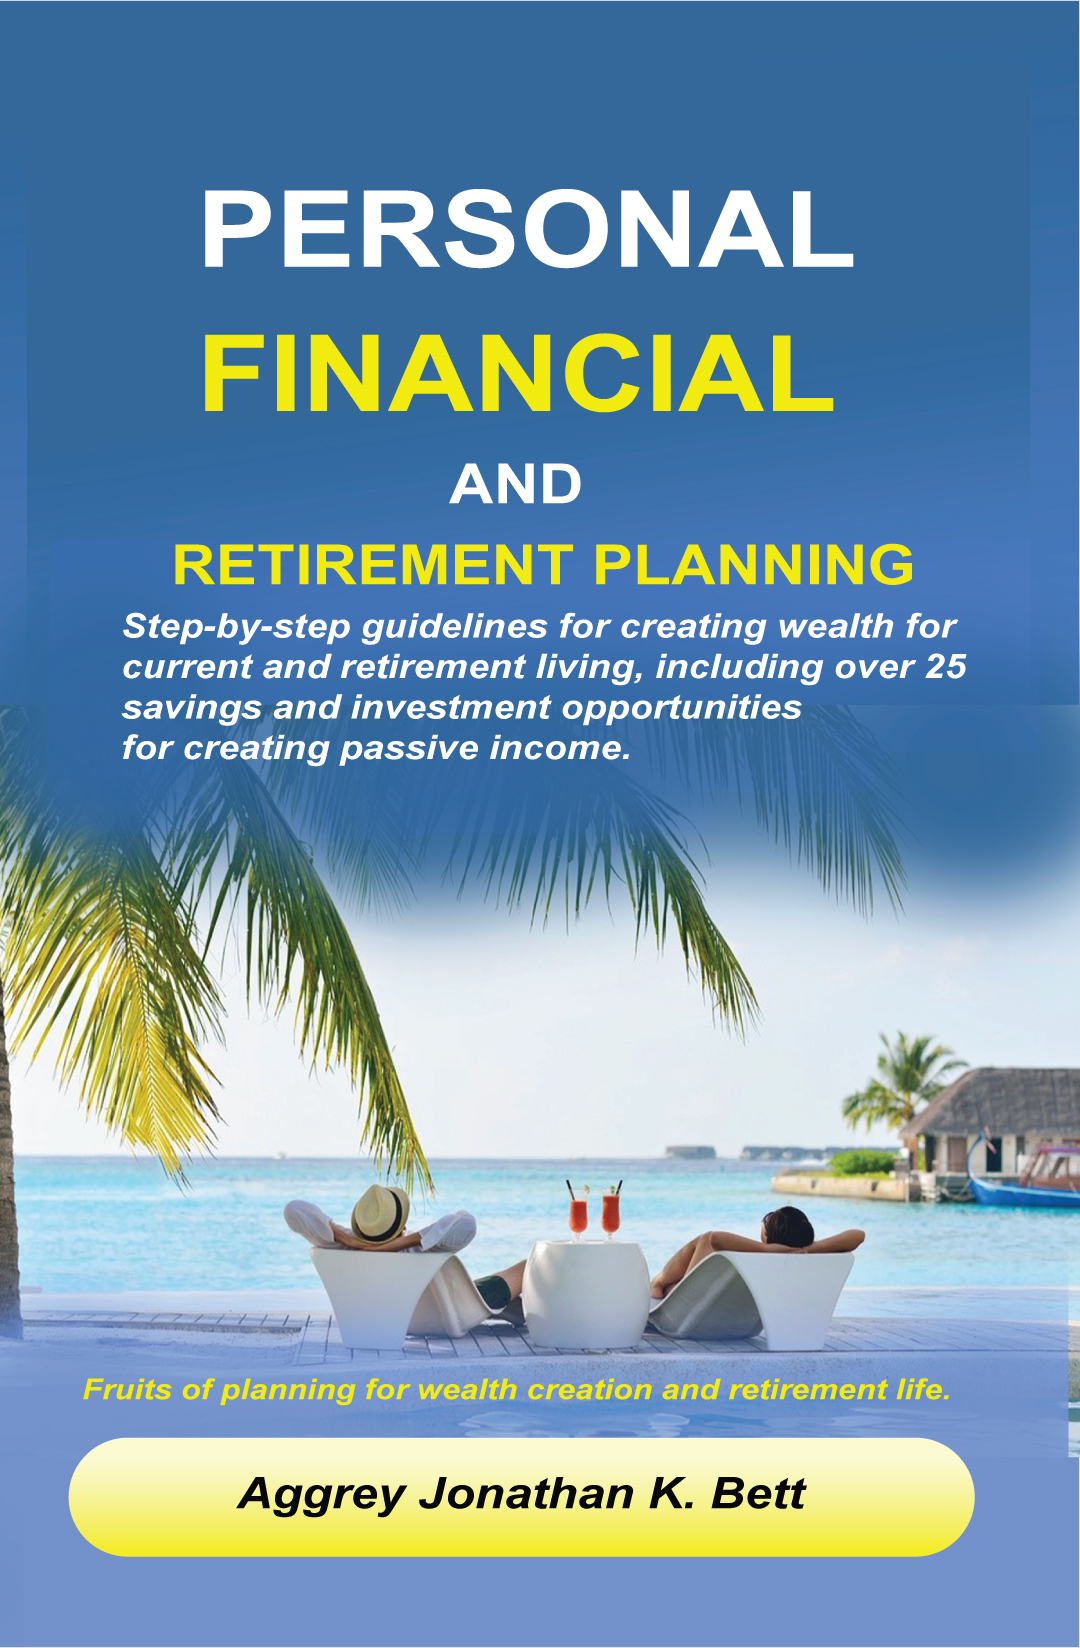 Book-Cover-Personal-Financial-Retirement-Planning-web image